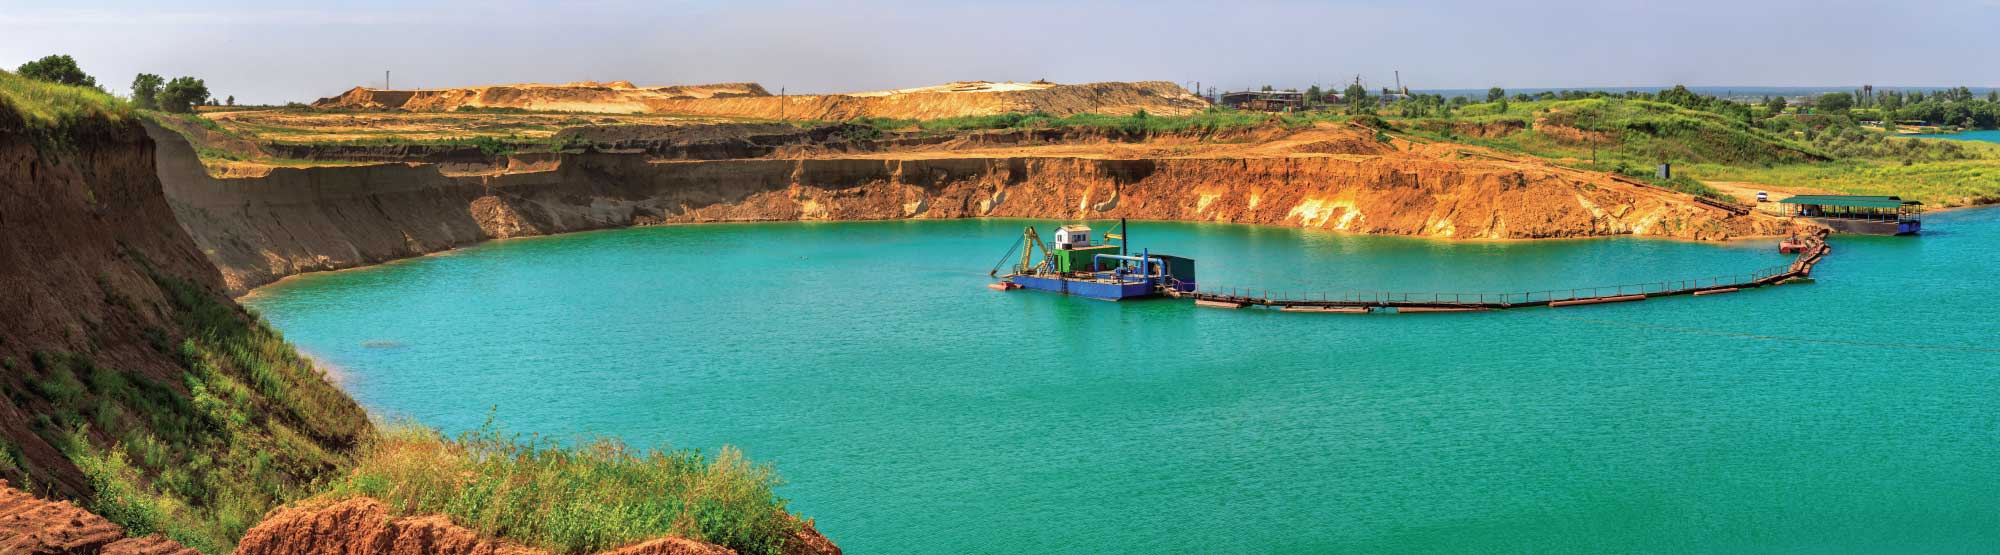 Dredge Operating in Sand Quarry